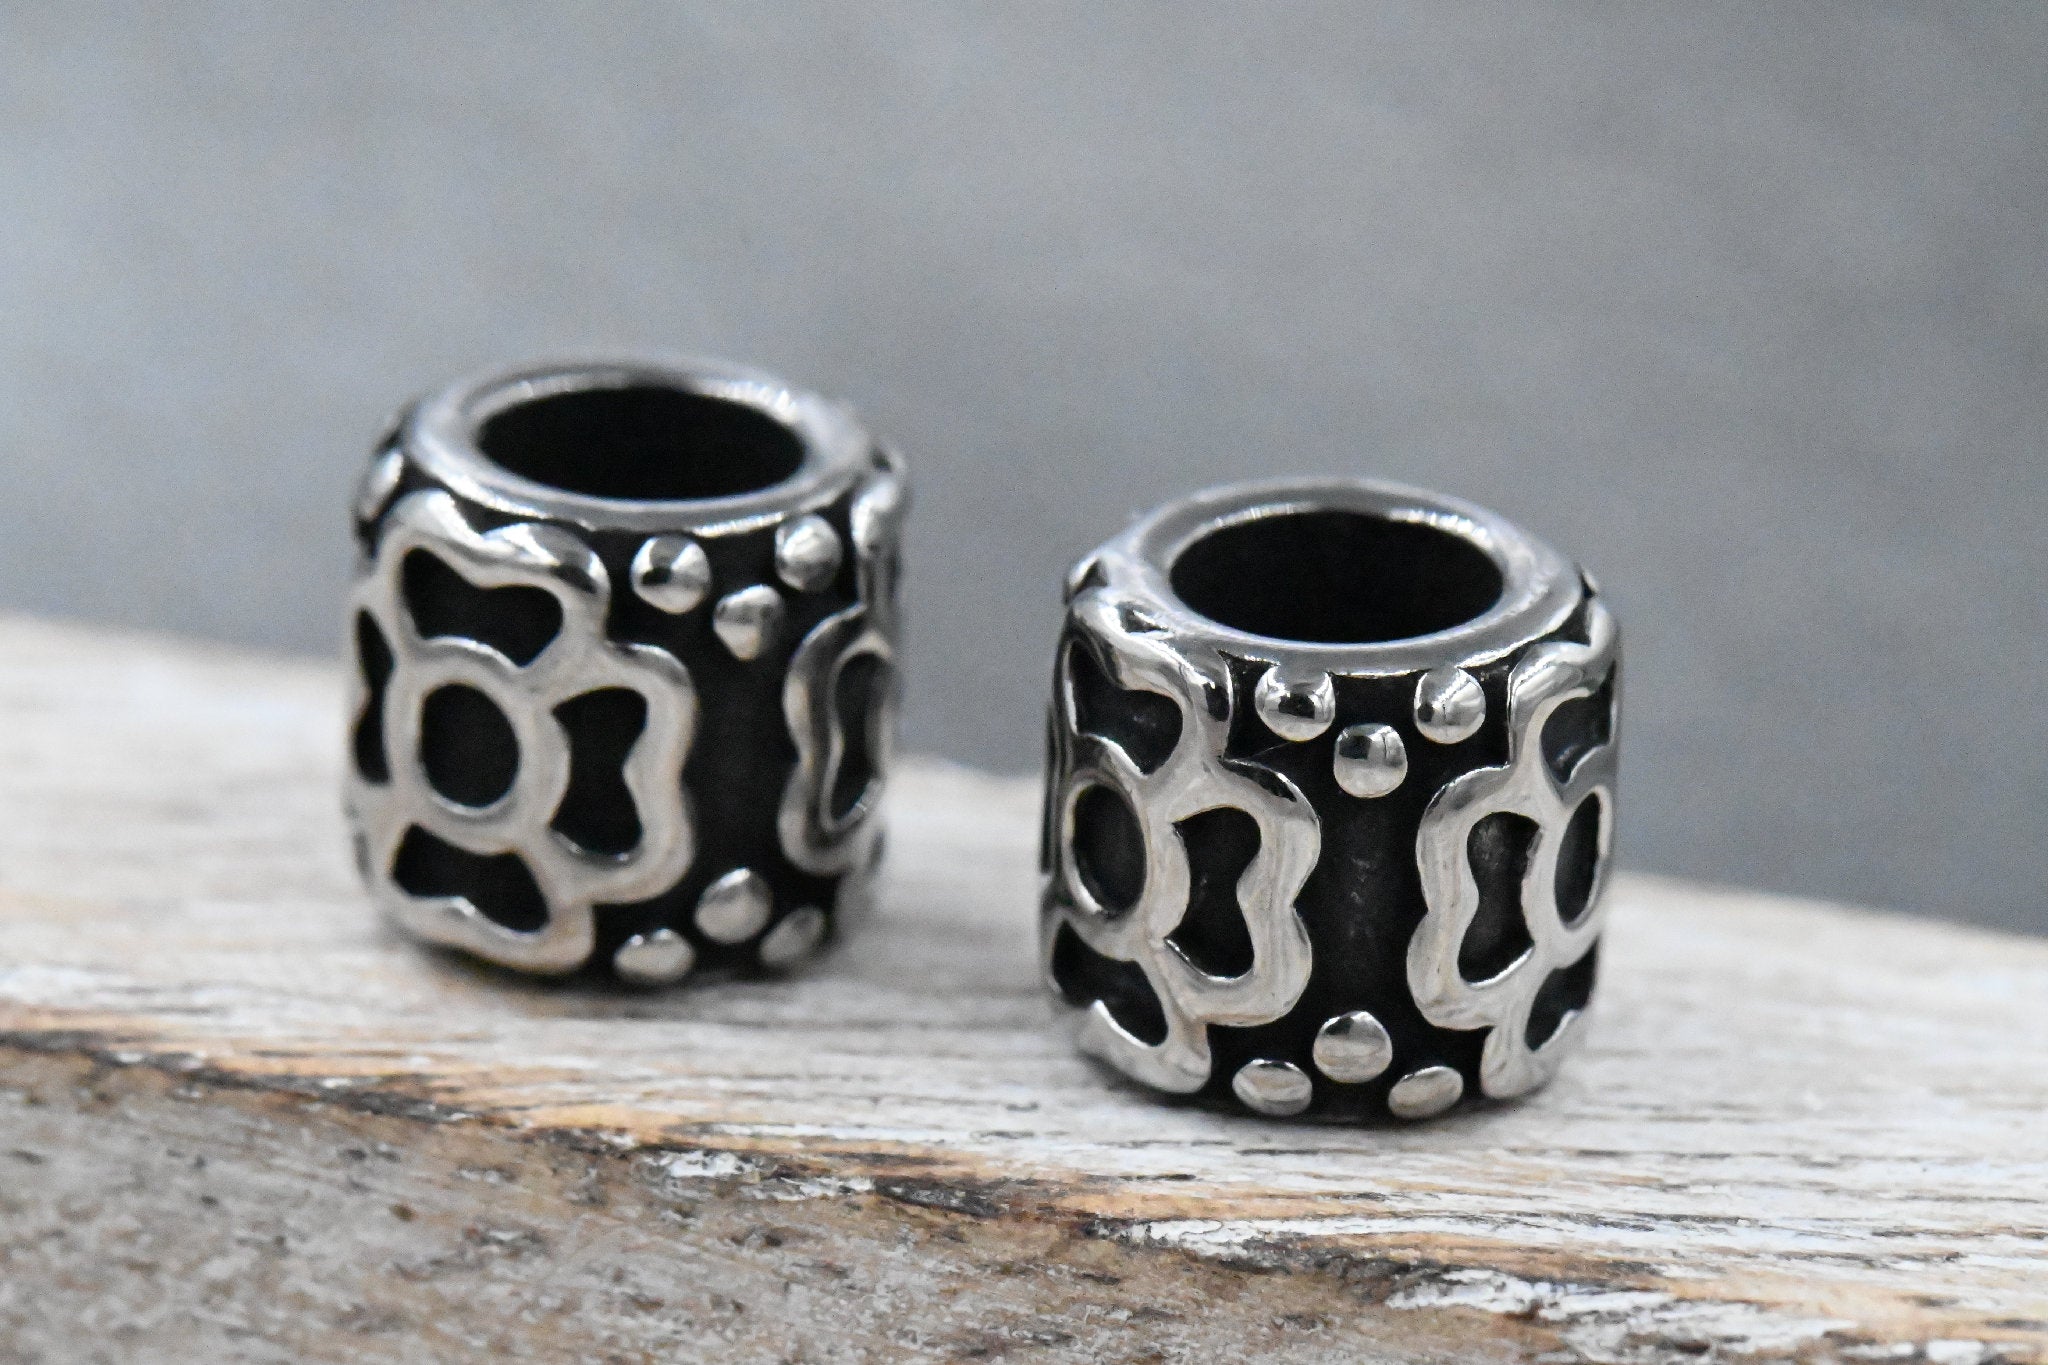 304 Stainless Steel Spacer Beads, Large Hole Beads, 1pc Column, Antique Silver, 8x9mm